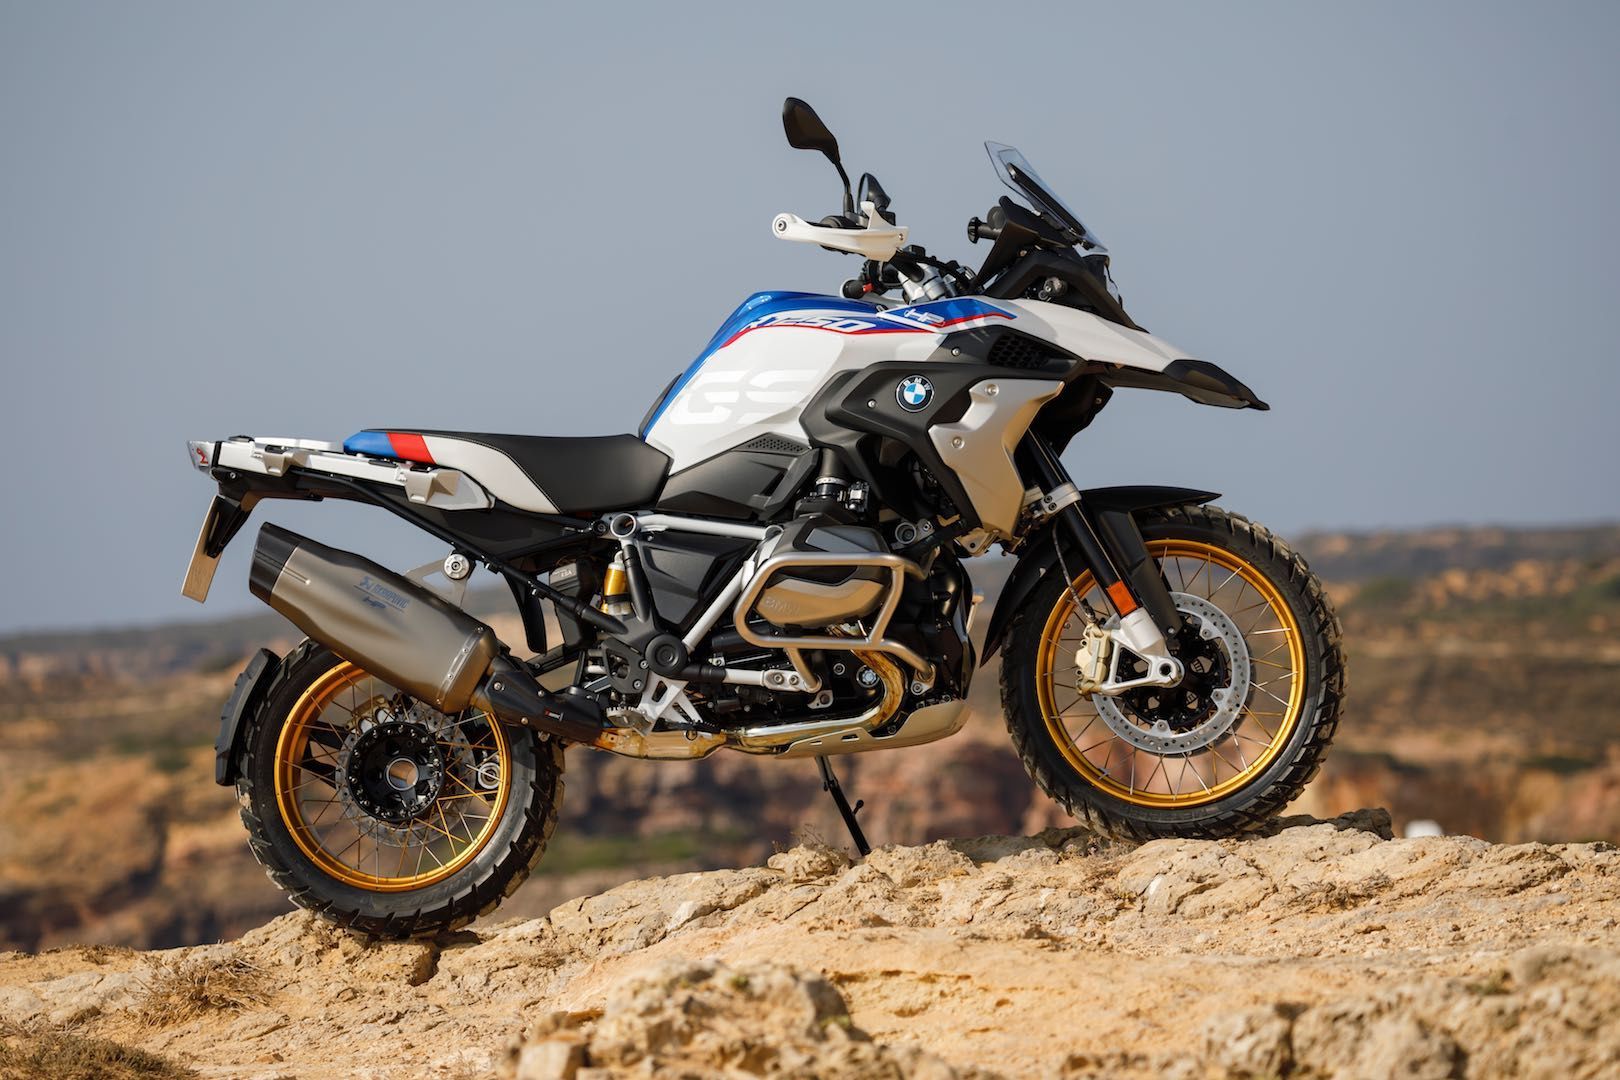 Bmw 1250 Gs 2019 Wallpaper from 2019 Bmw R 1250 Gs Unveiled With Variable Timing (11 Fast Facts + Video) with re. Bmw motorrad, Bmw adventure bike, Bmw motorbikes